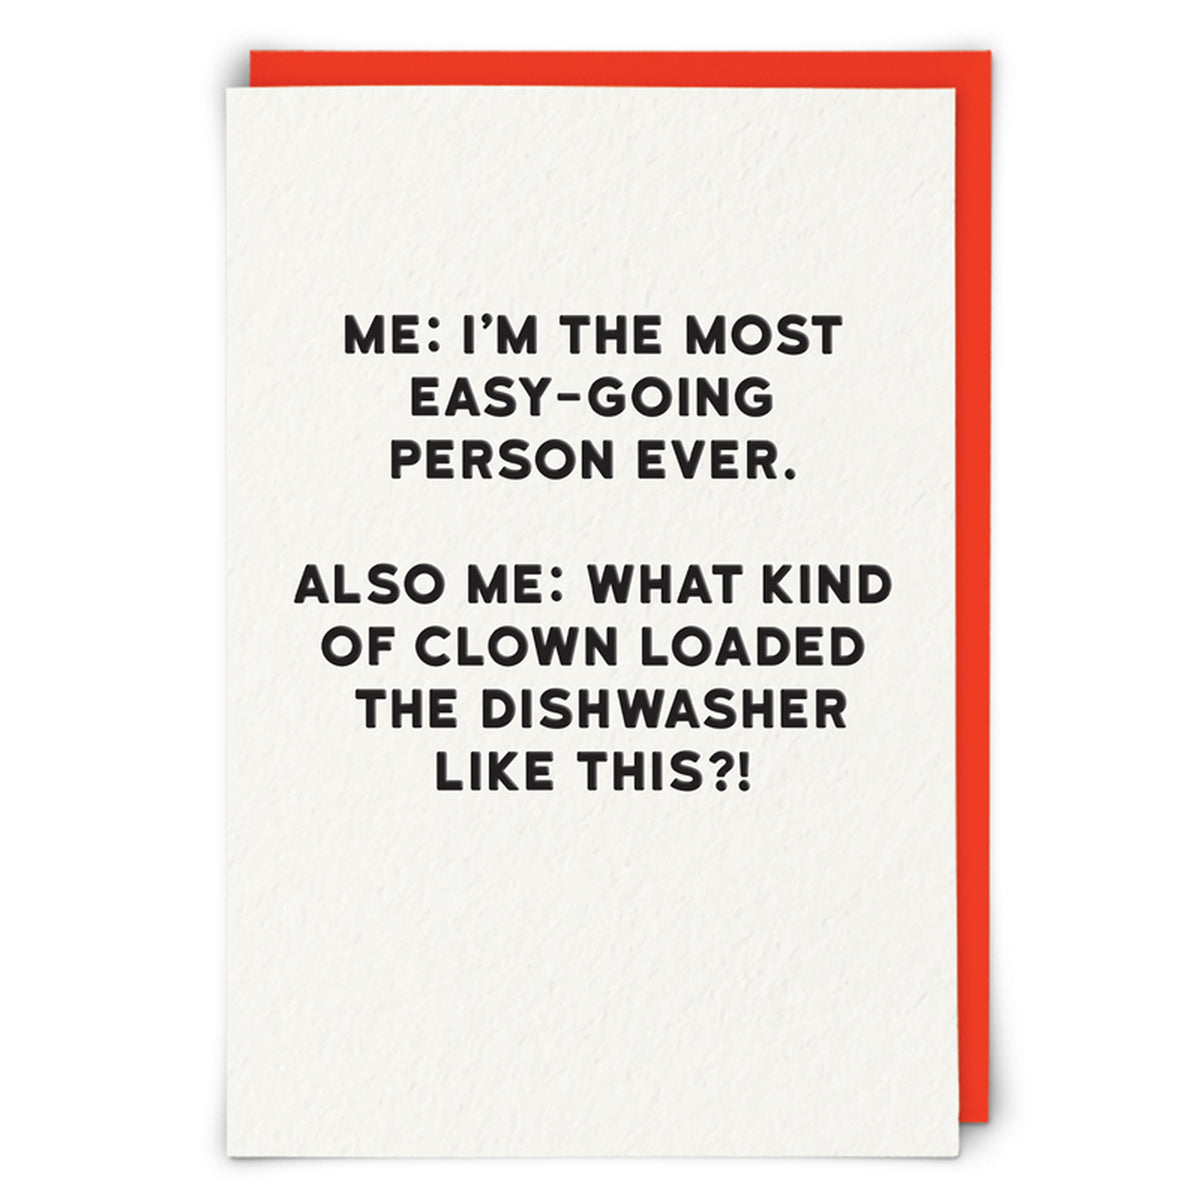 Dishwasher Clown Funny Card from Penny Black